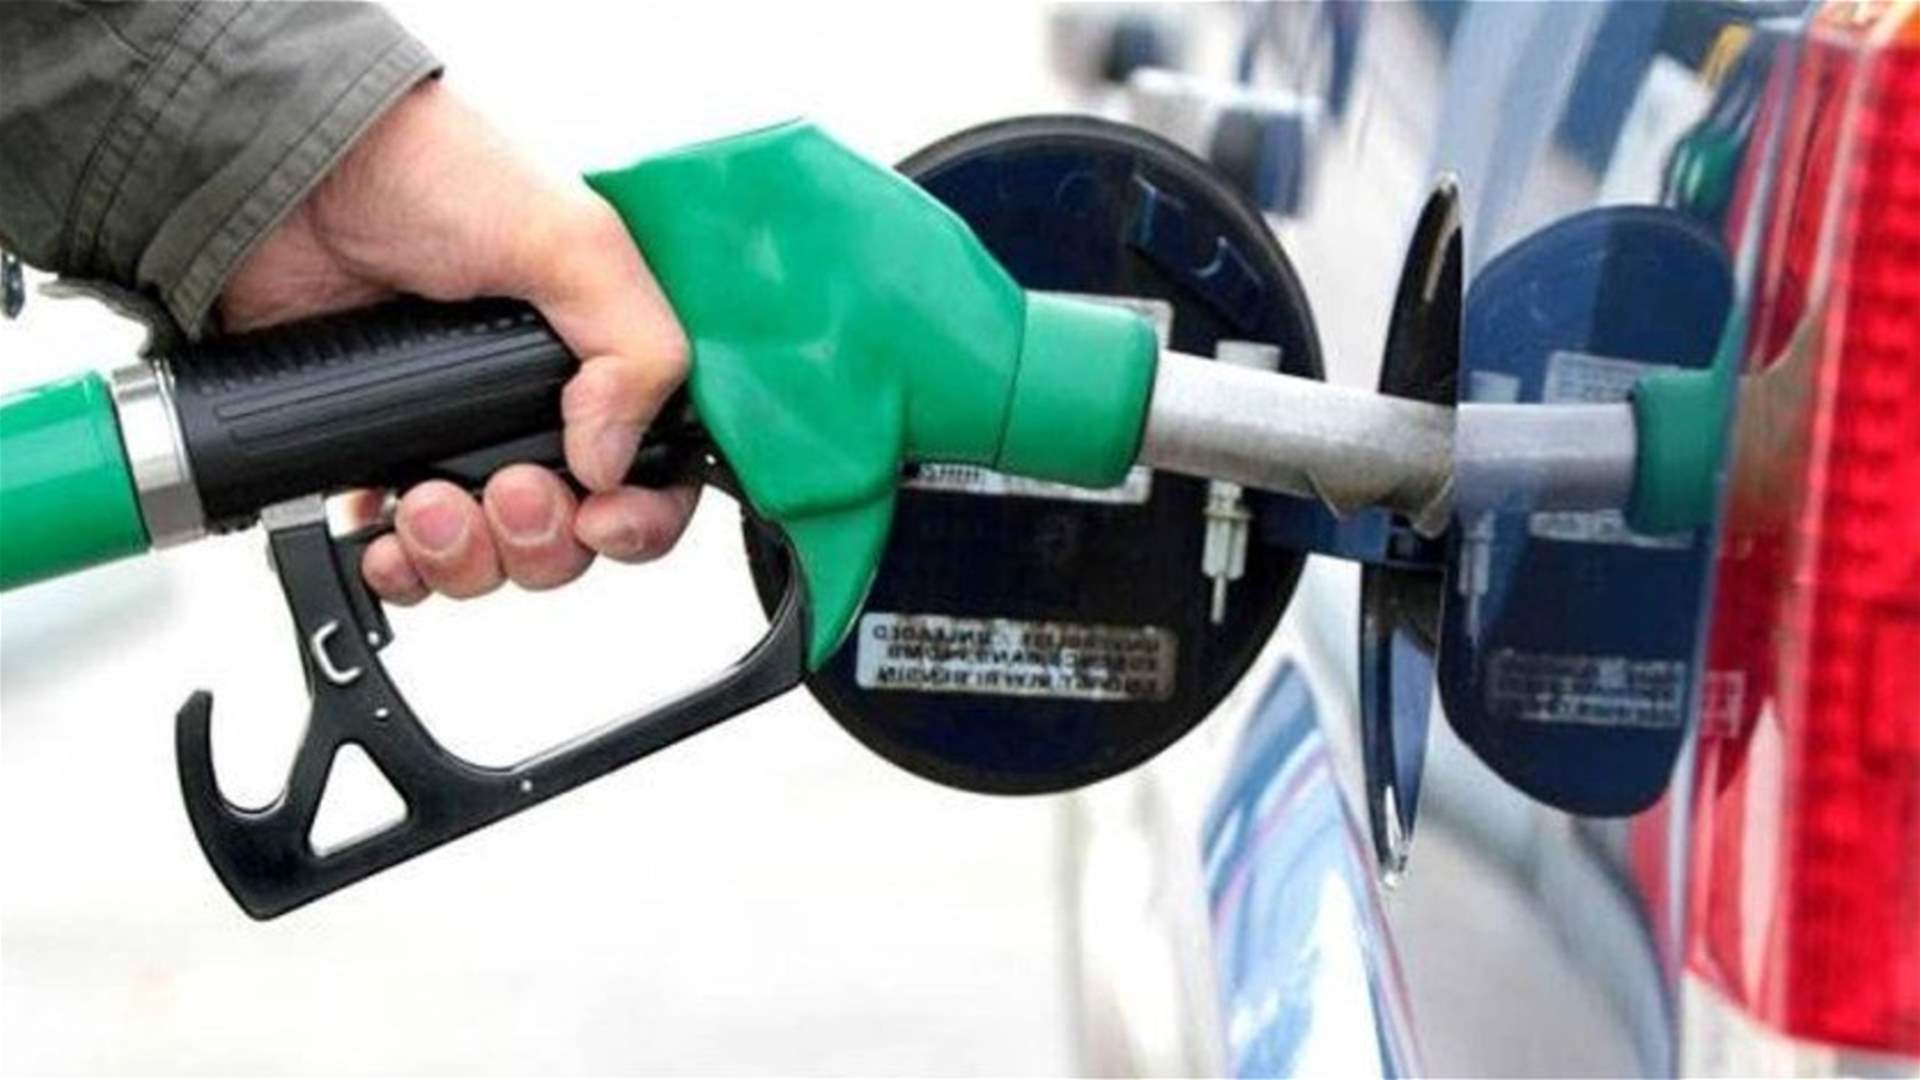 Price of 98 octane fuel drops by 1000 LBP